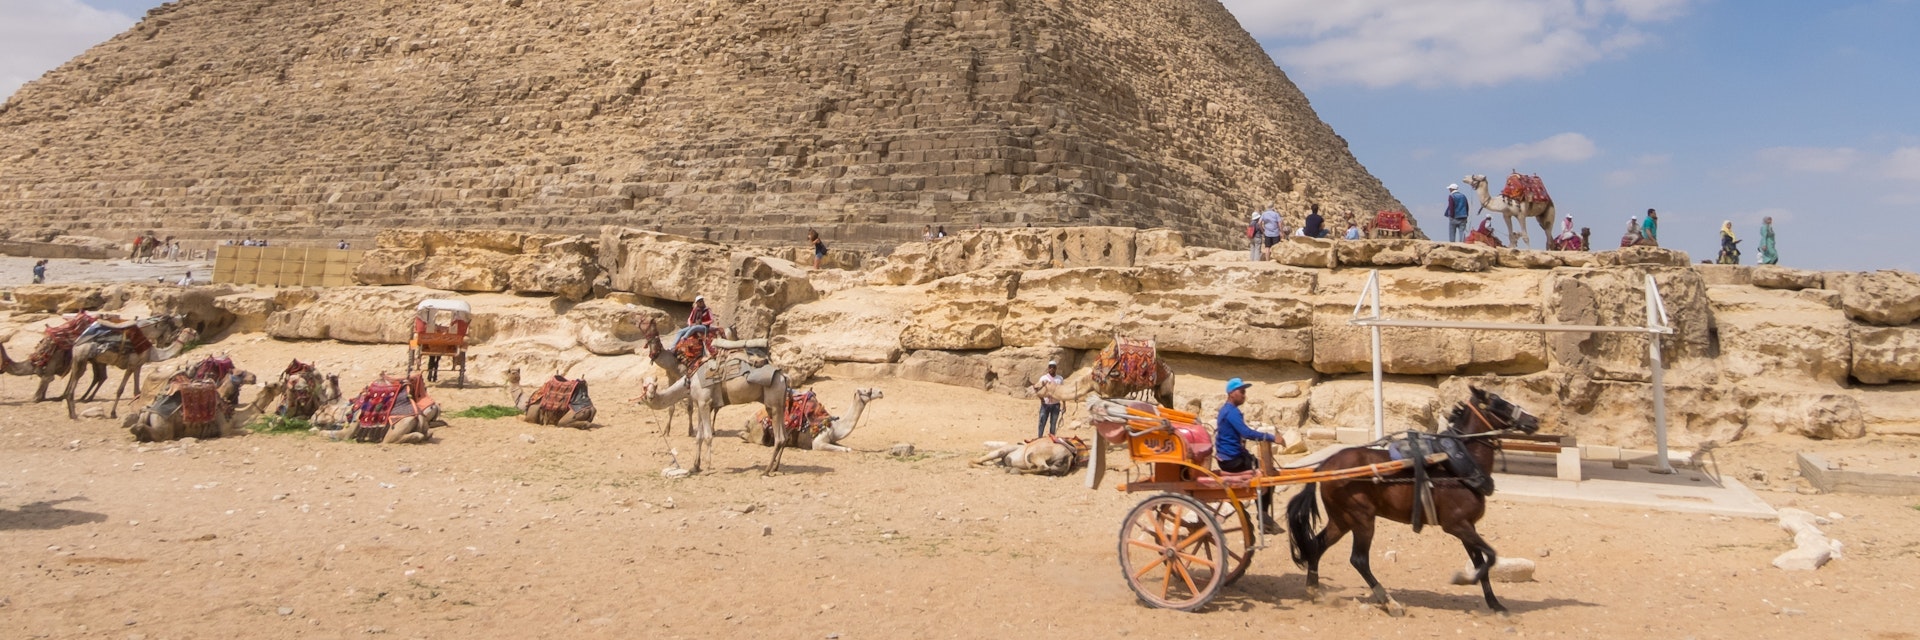 Camels and horse-drawn carriages next to Khafre's pyramid in Giza.